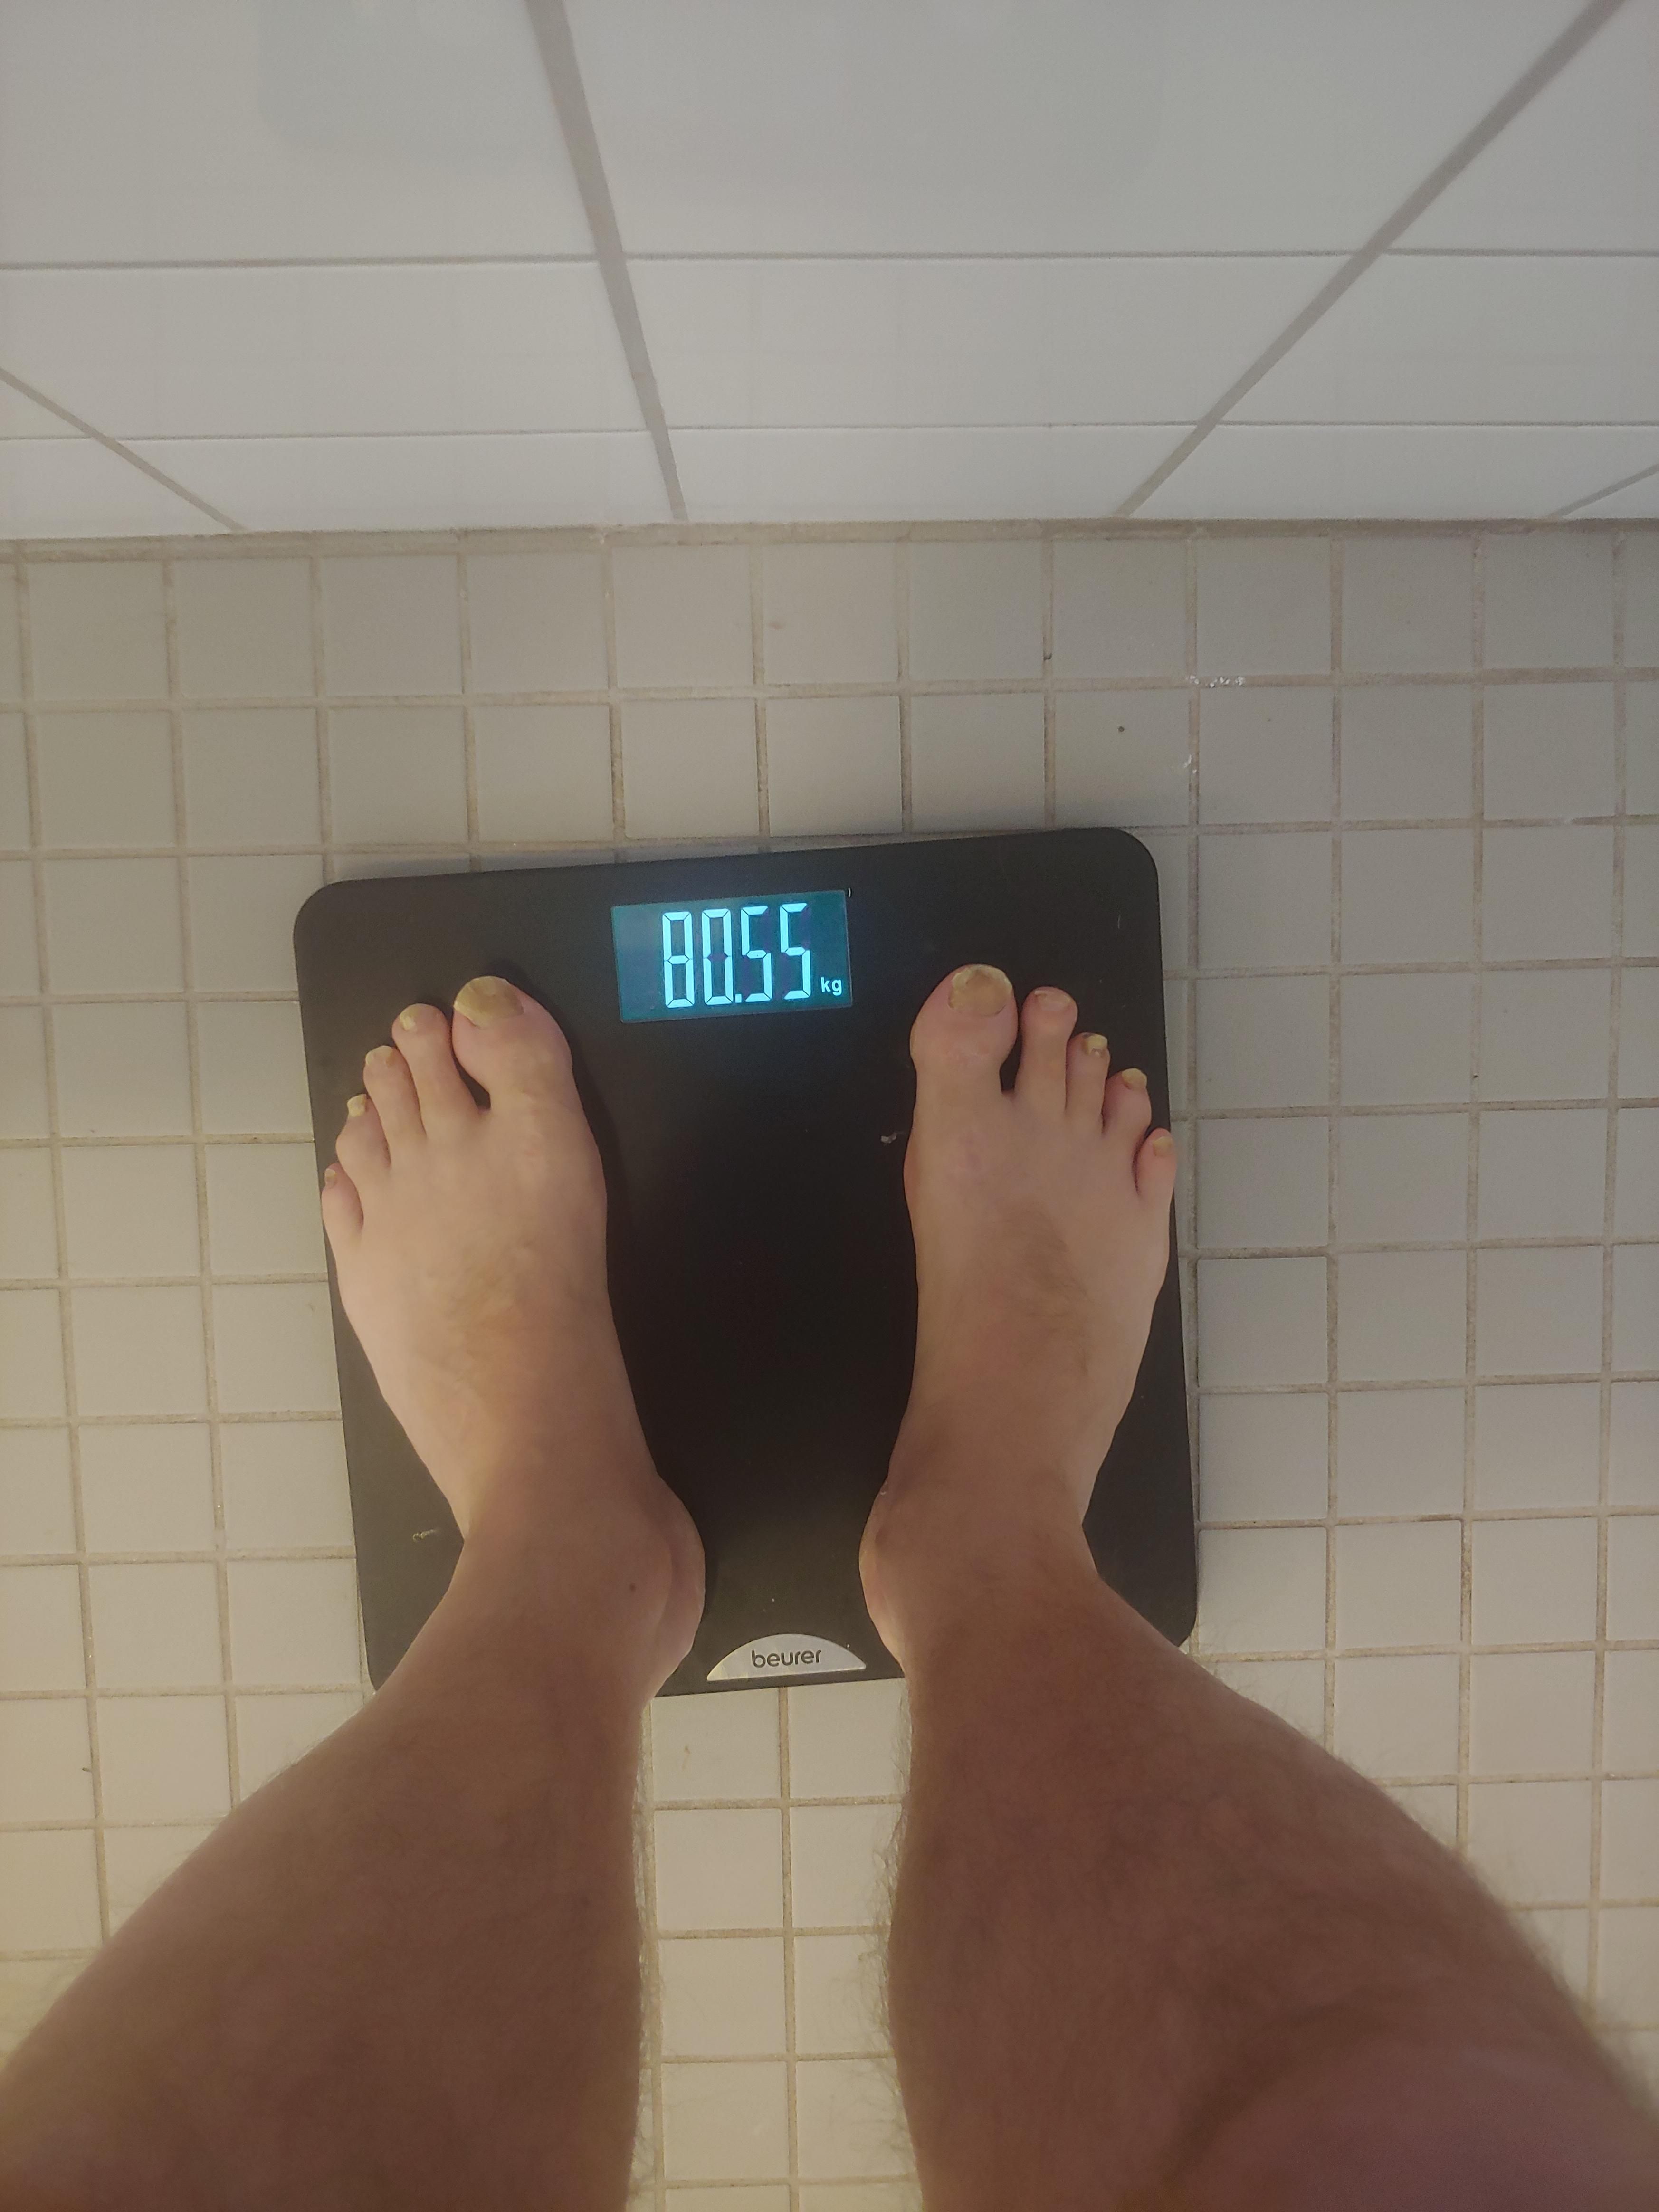 I was afraid my weight was too high, but it's not. It is...